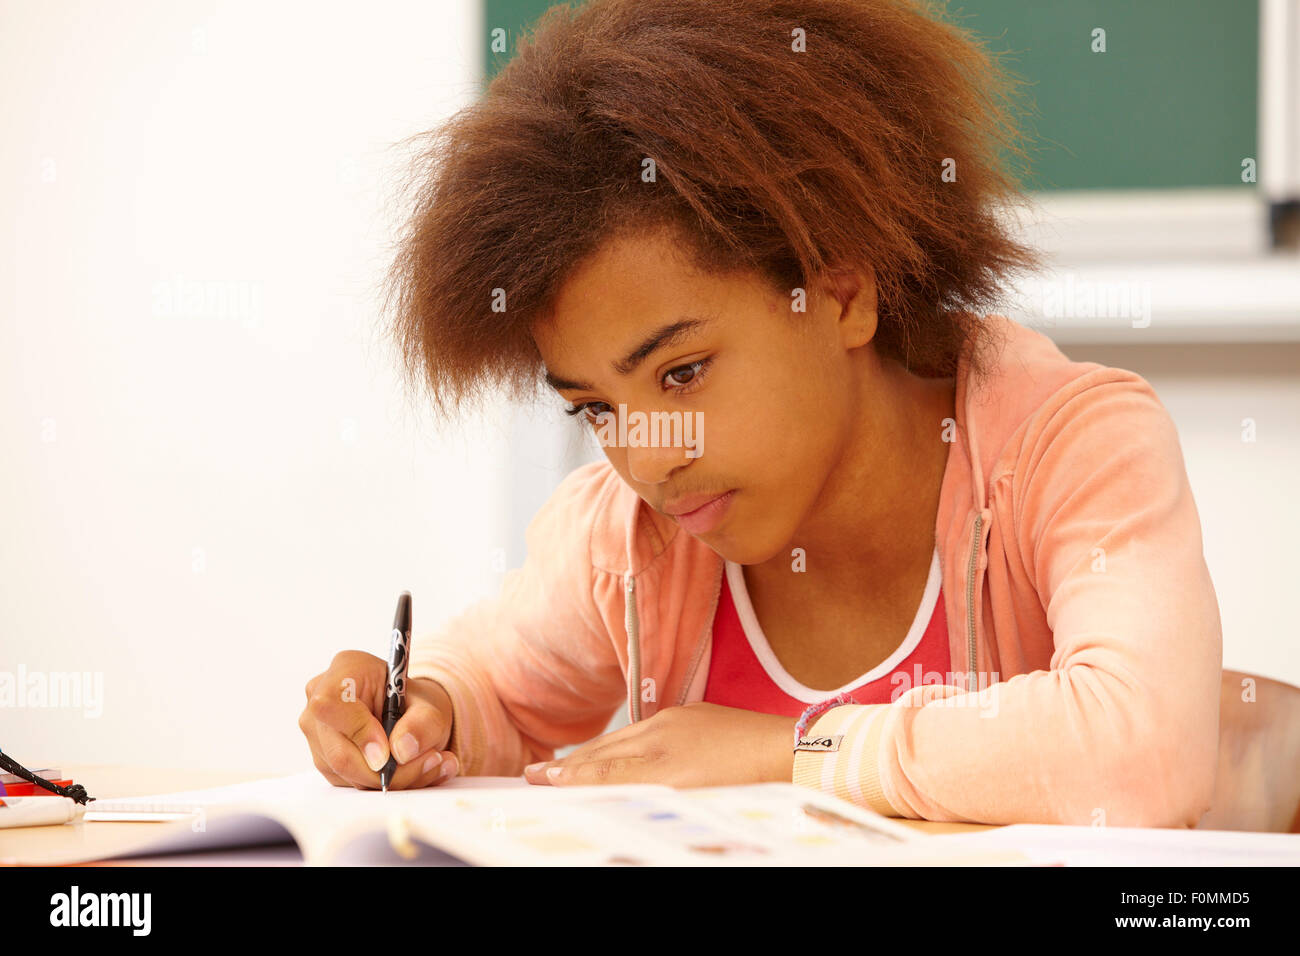 Concentrated girl in school Stock Photo